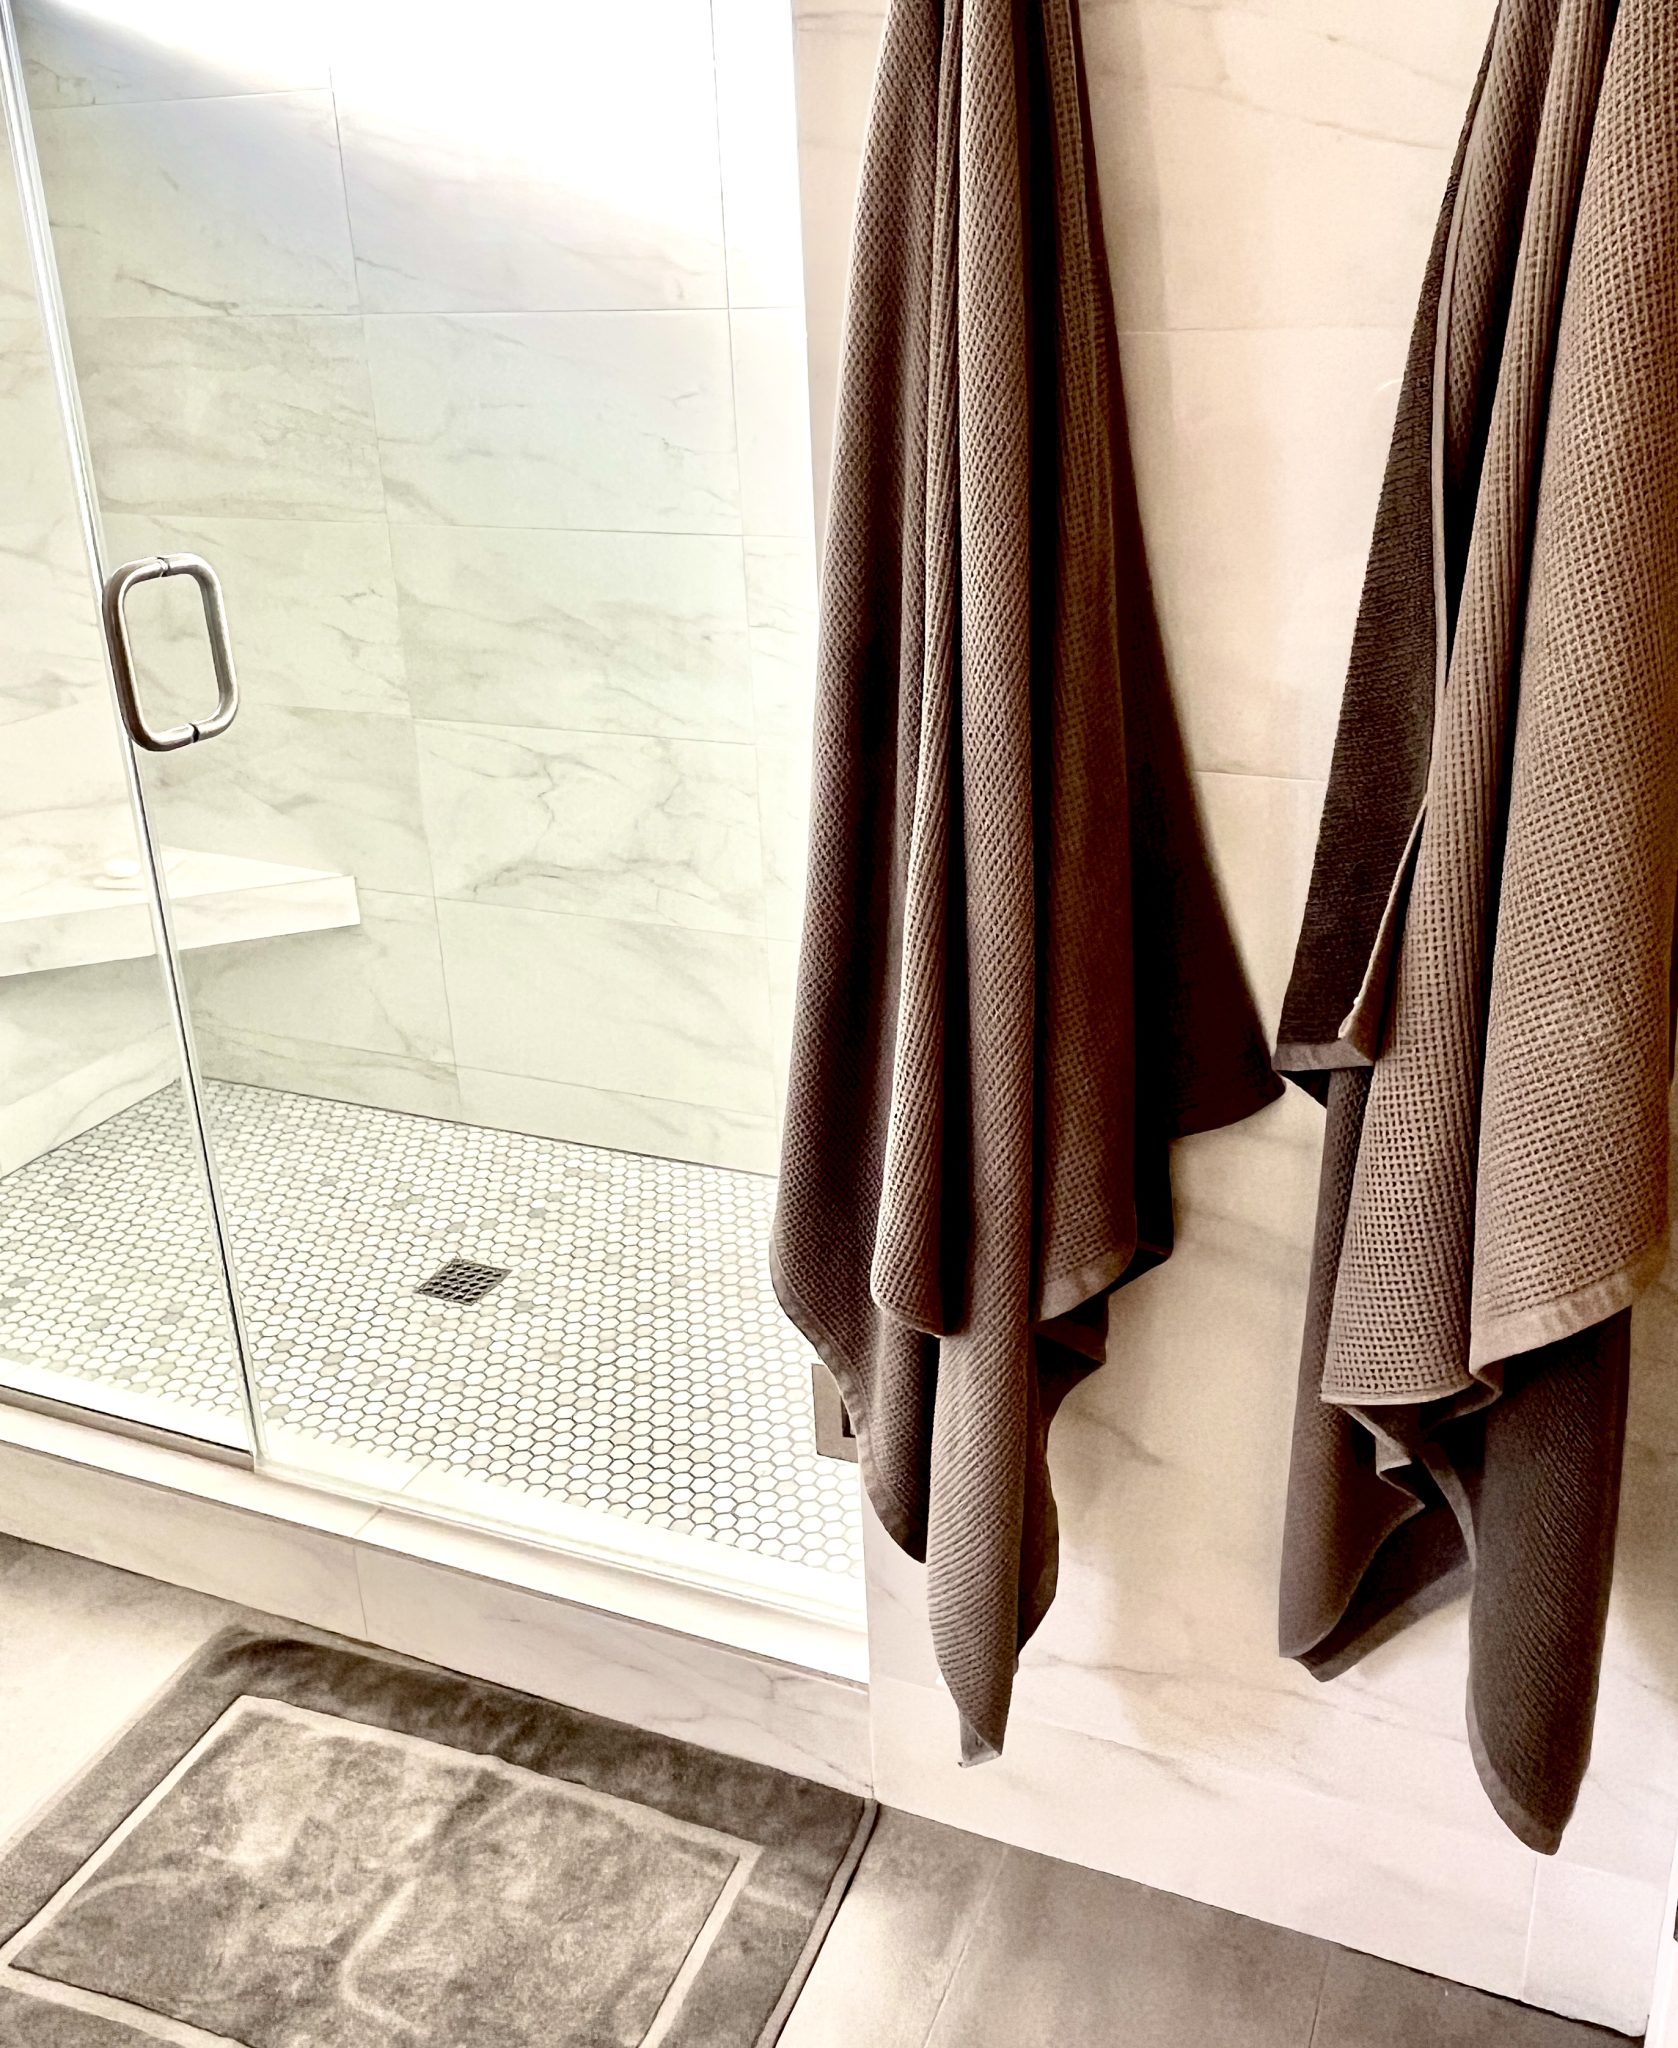 I upgraded our towel collection with the Waffle Bath Towel Bundle in Charcoal.